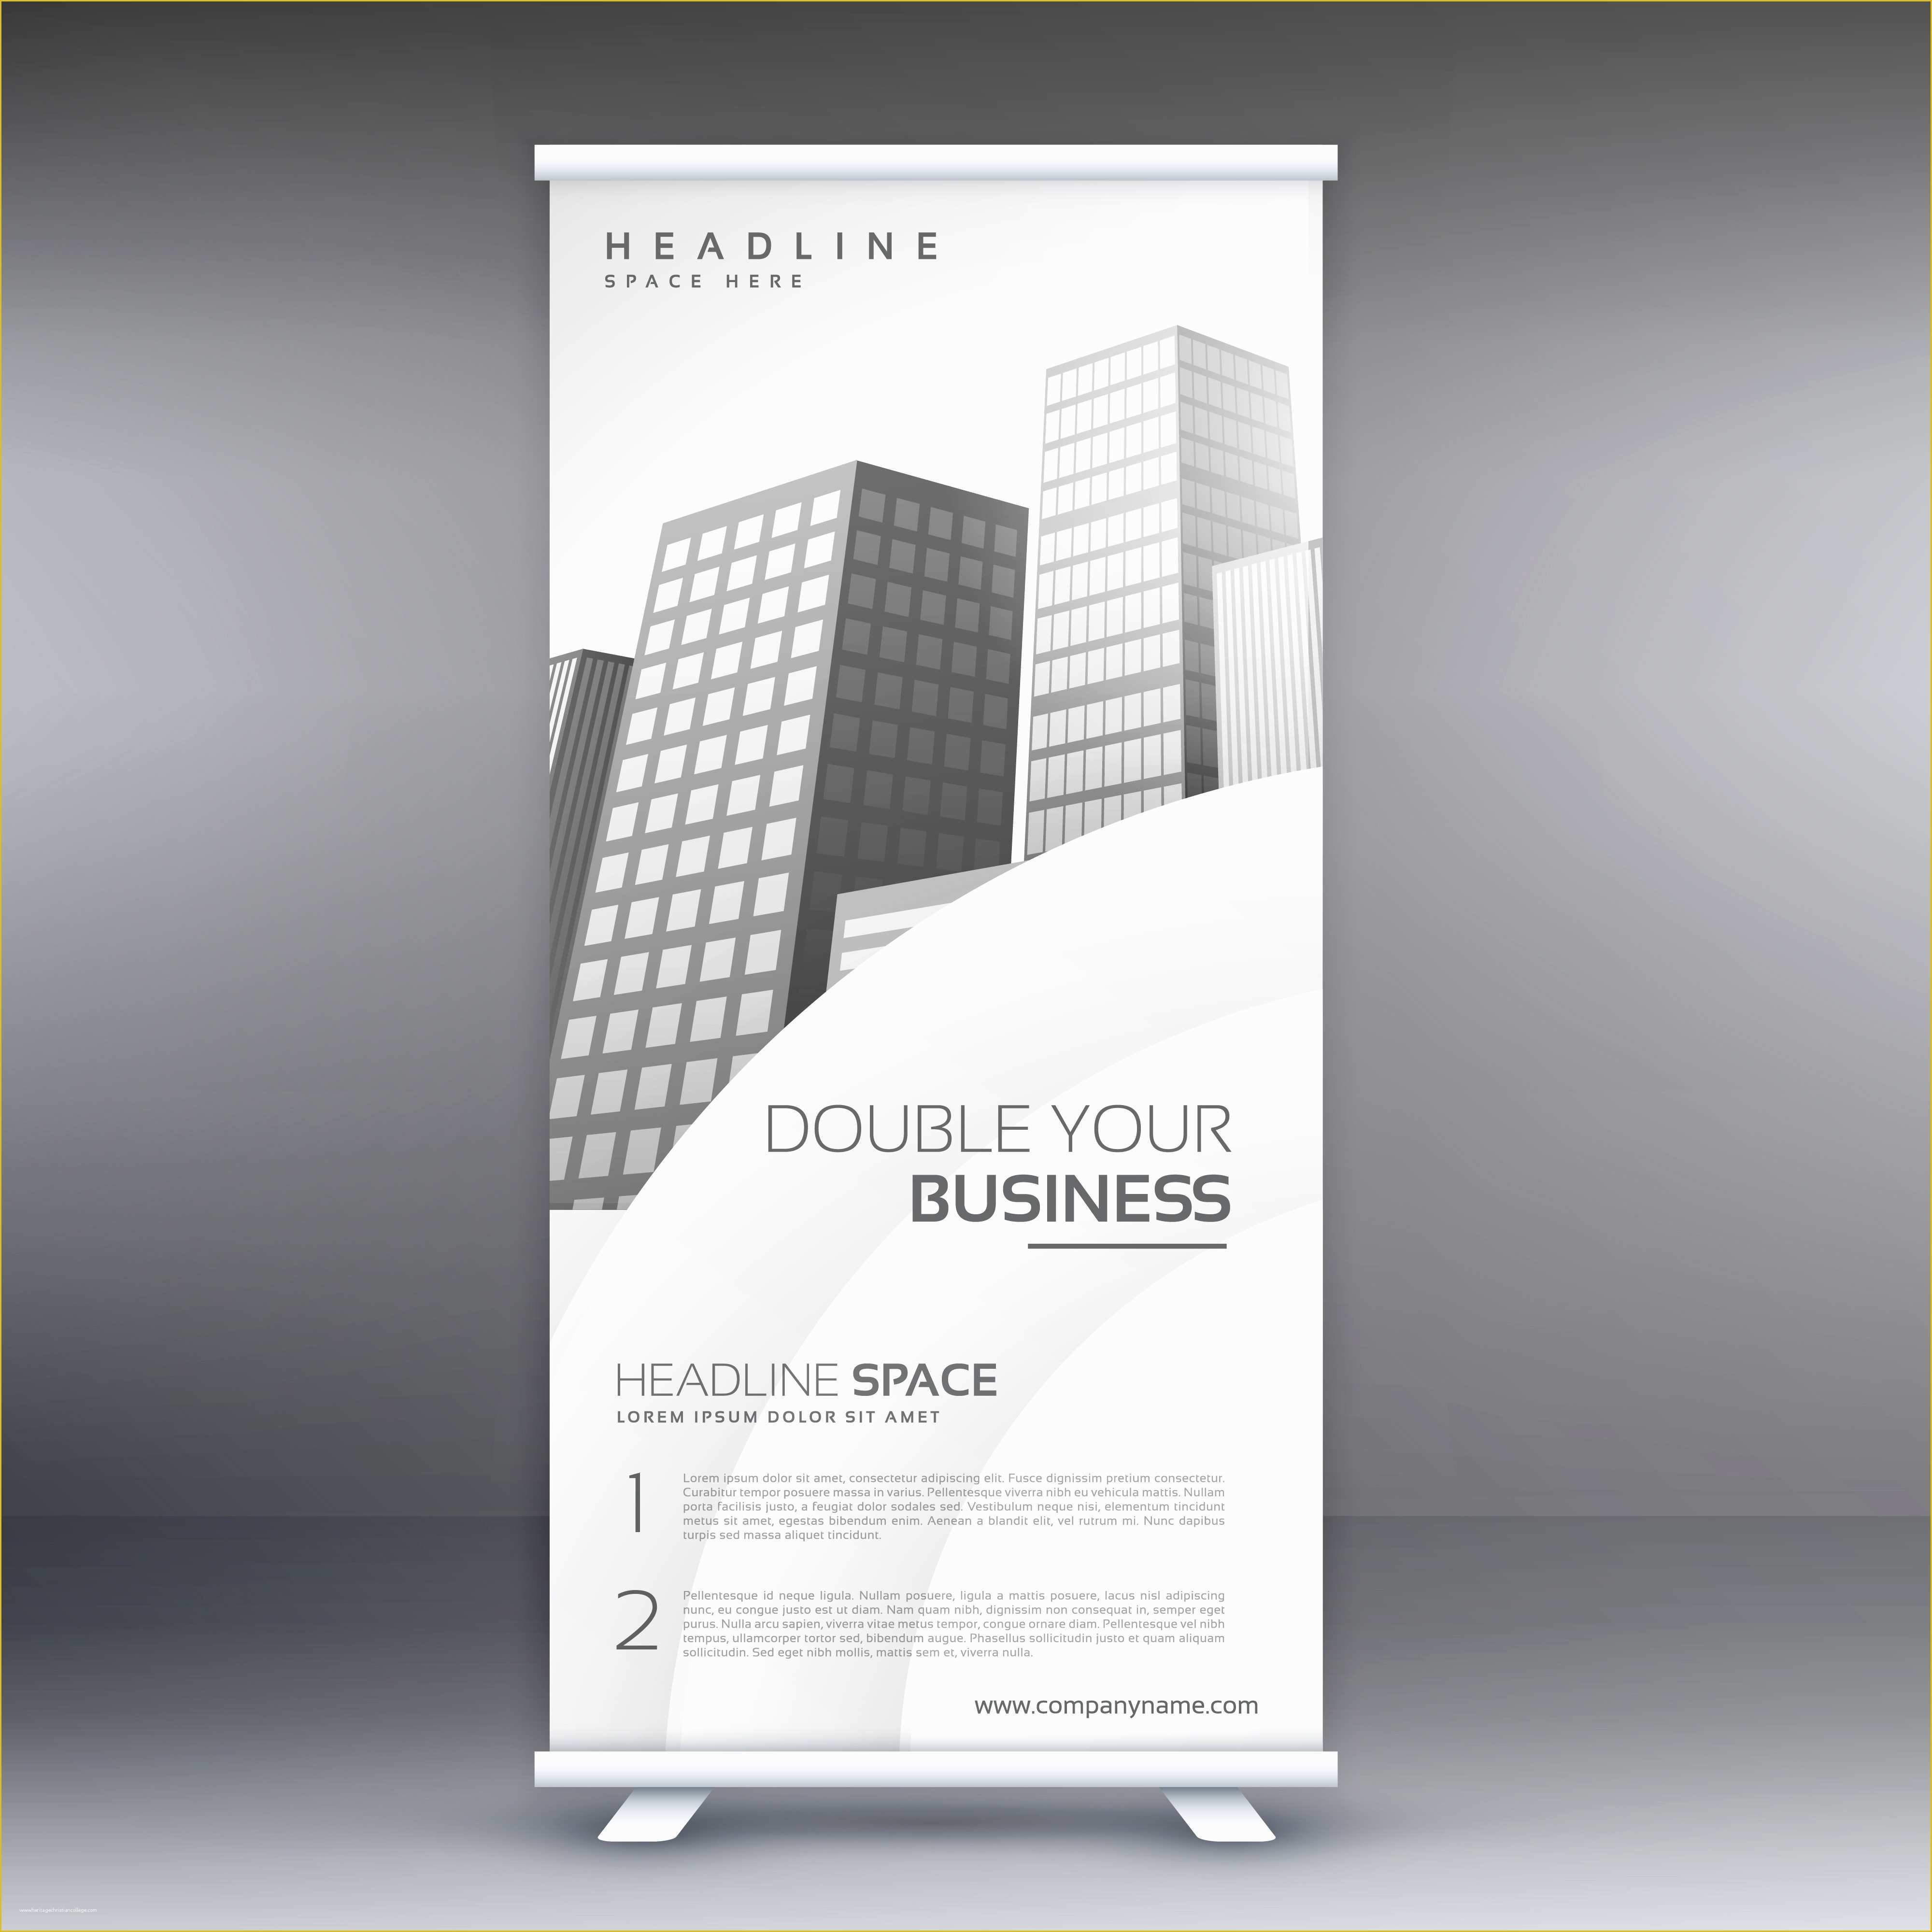 Roll Up Banner Design Template Free Download Of Elegant White Standee Roll Up Banner Design Template